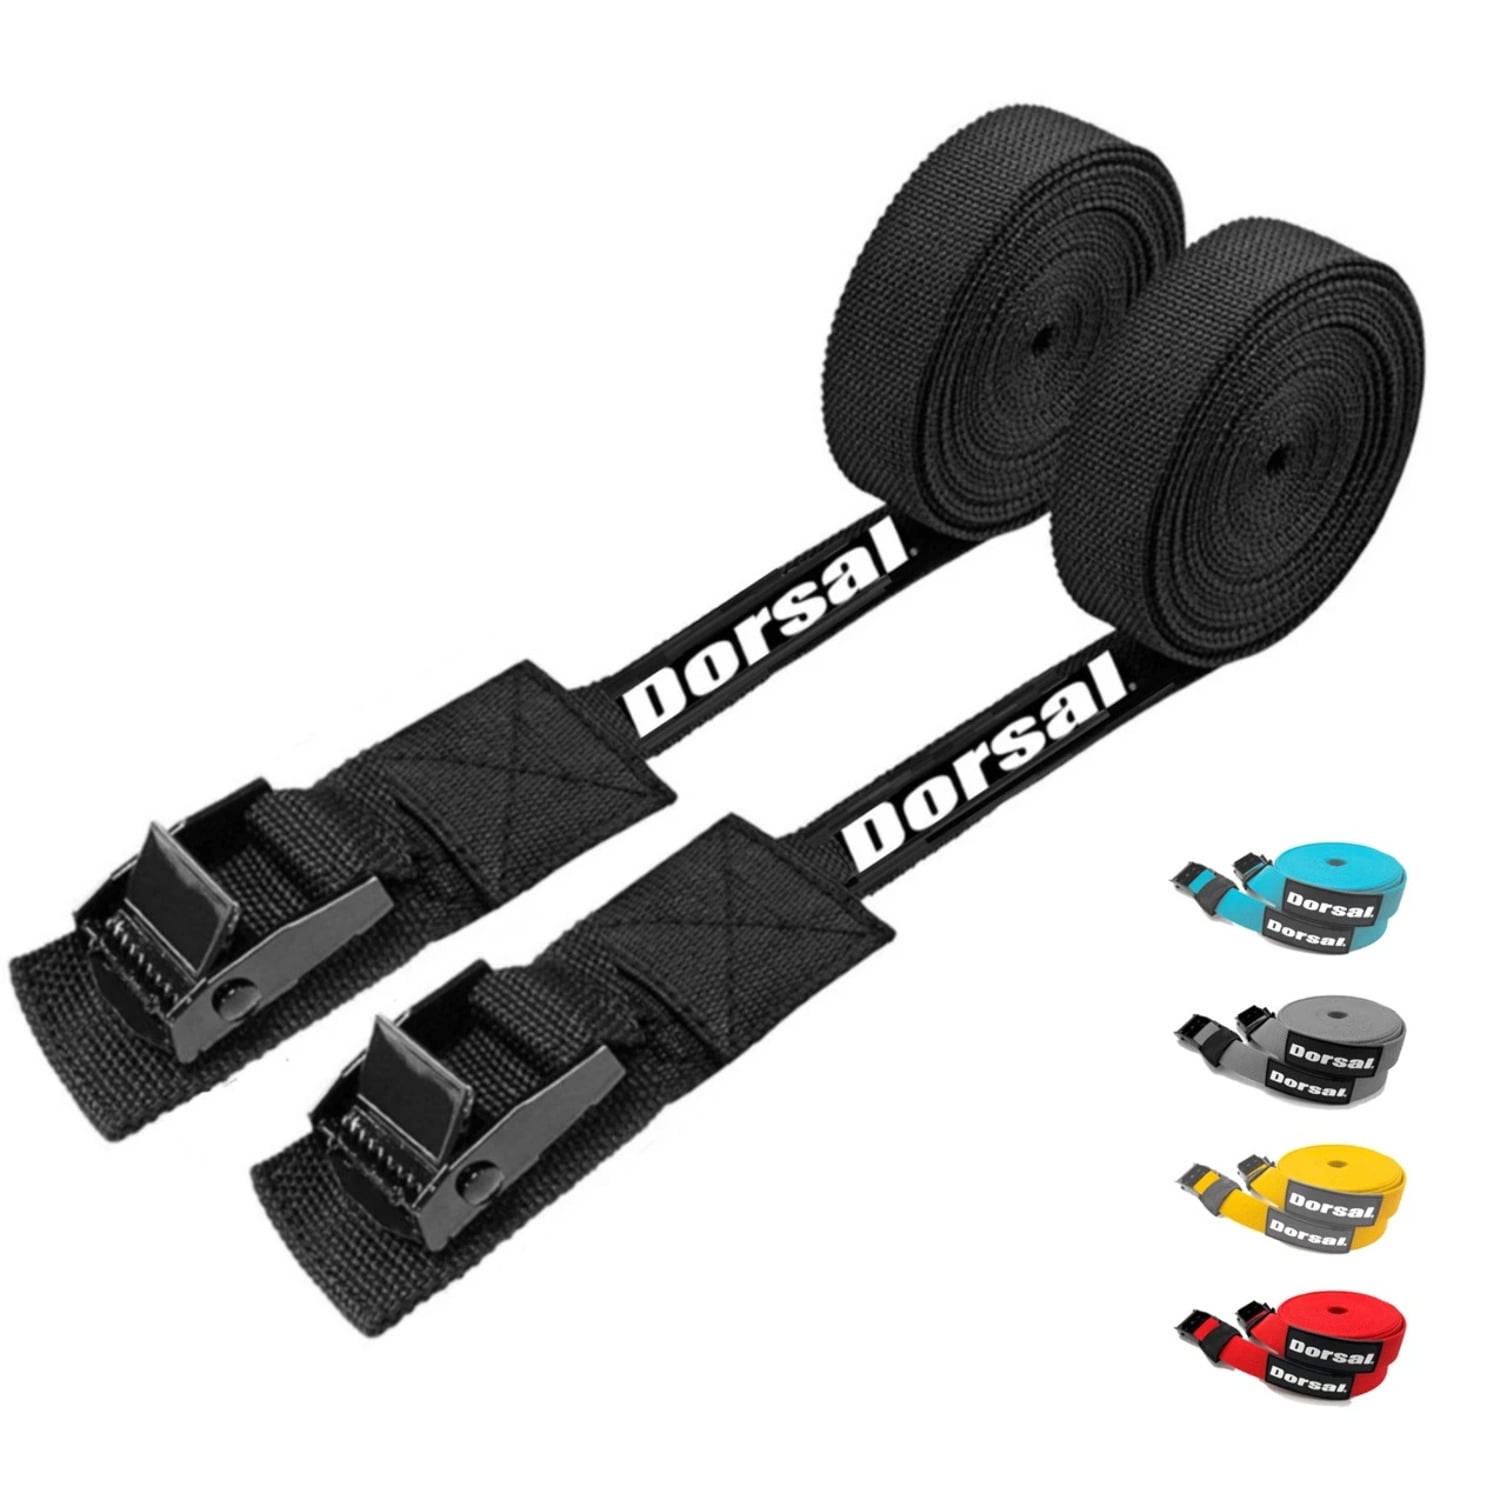 2Pcs Cam Tie Down Straps For Surfboards SUPs Kayaks On Roof Racks Or Trailers 